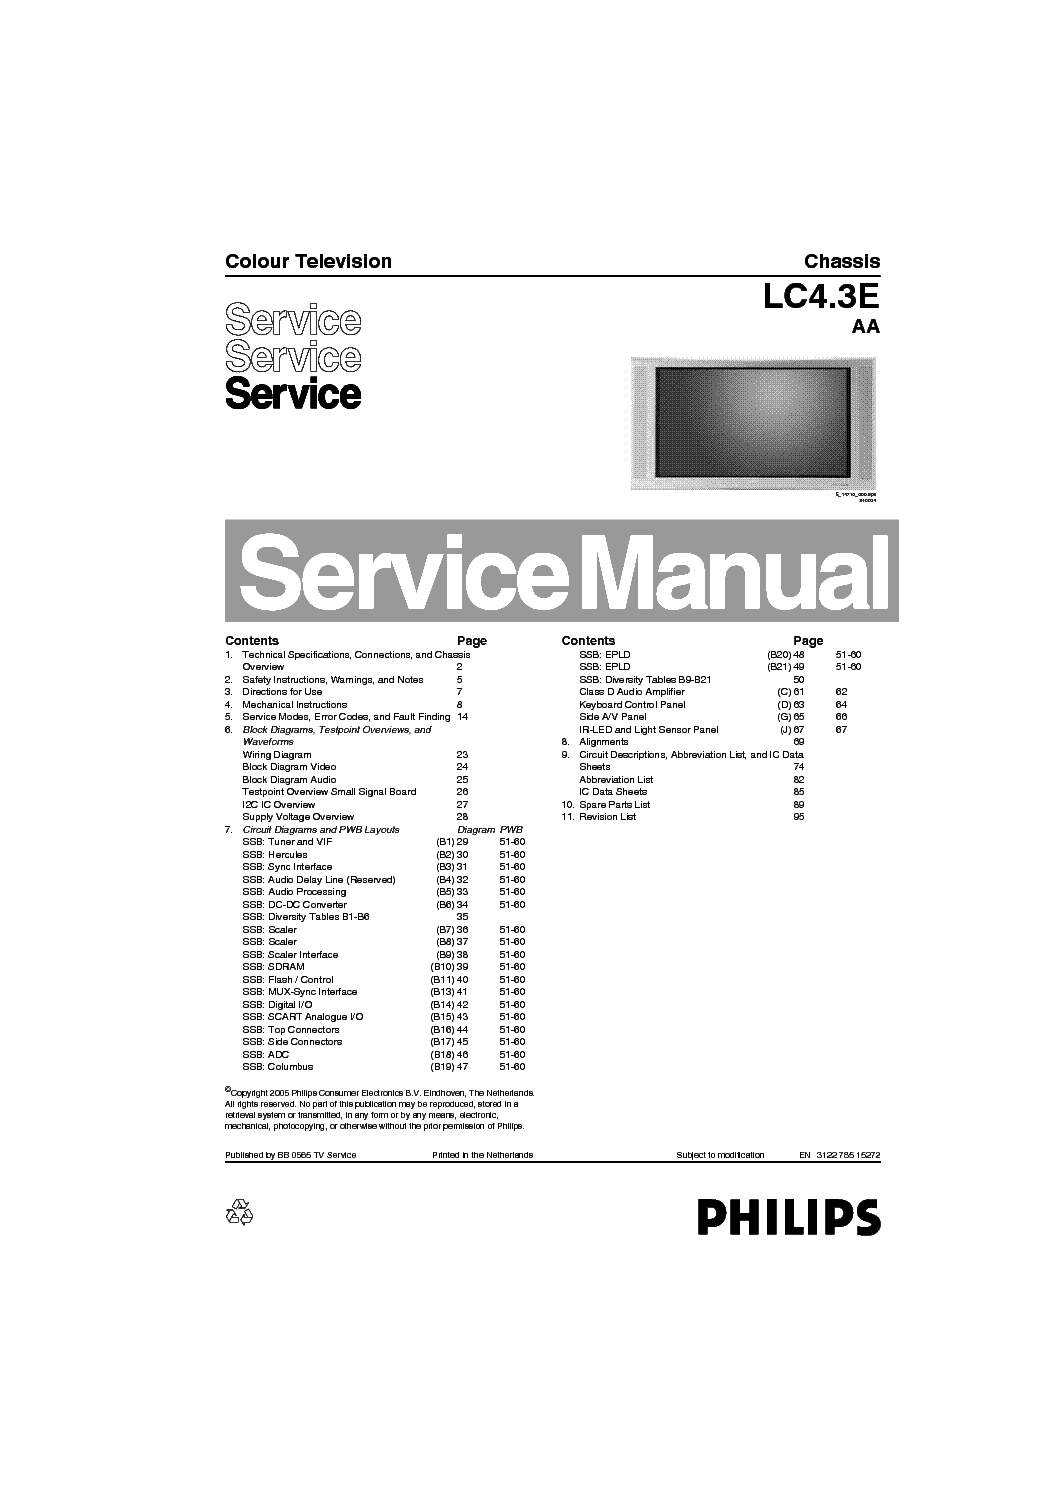 PHILIPS TV CH LC4.3E AA SERVICE MANUAL service manual (1st page)